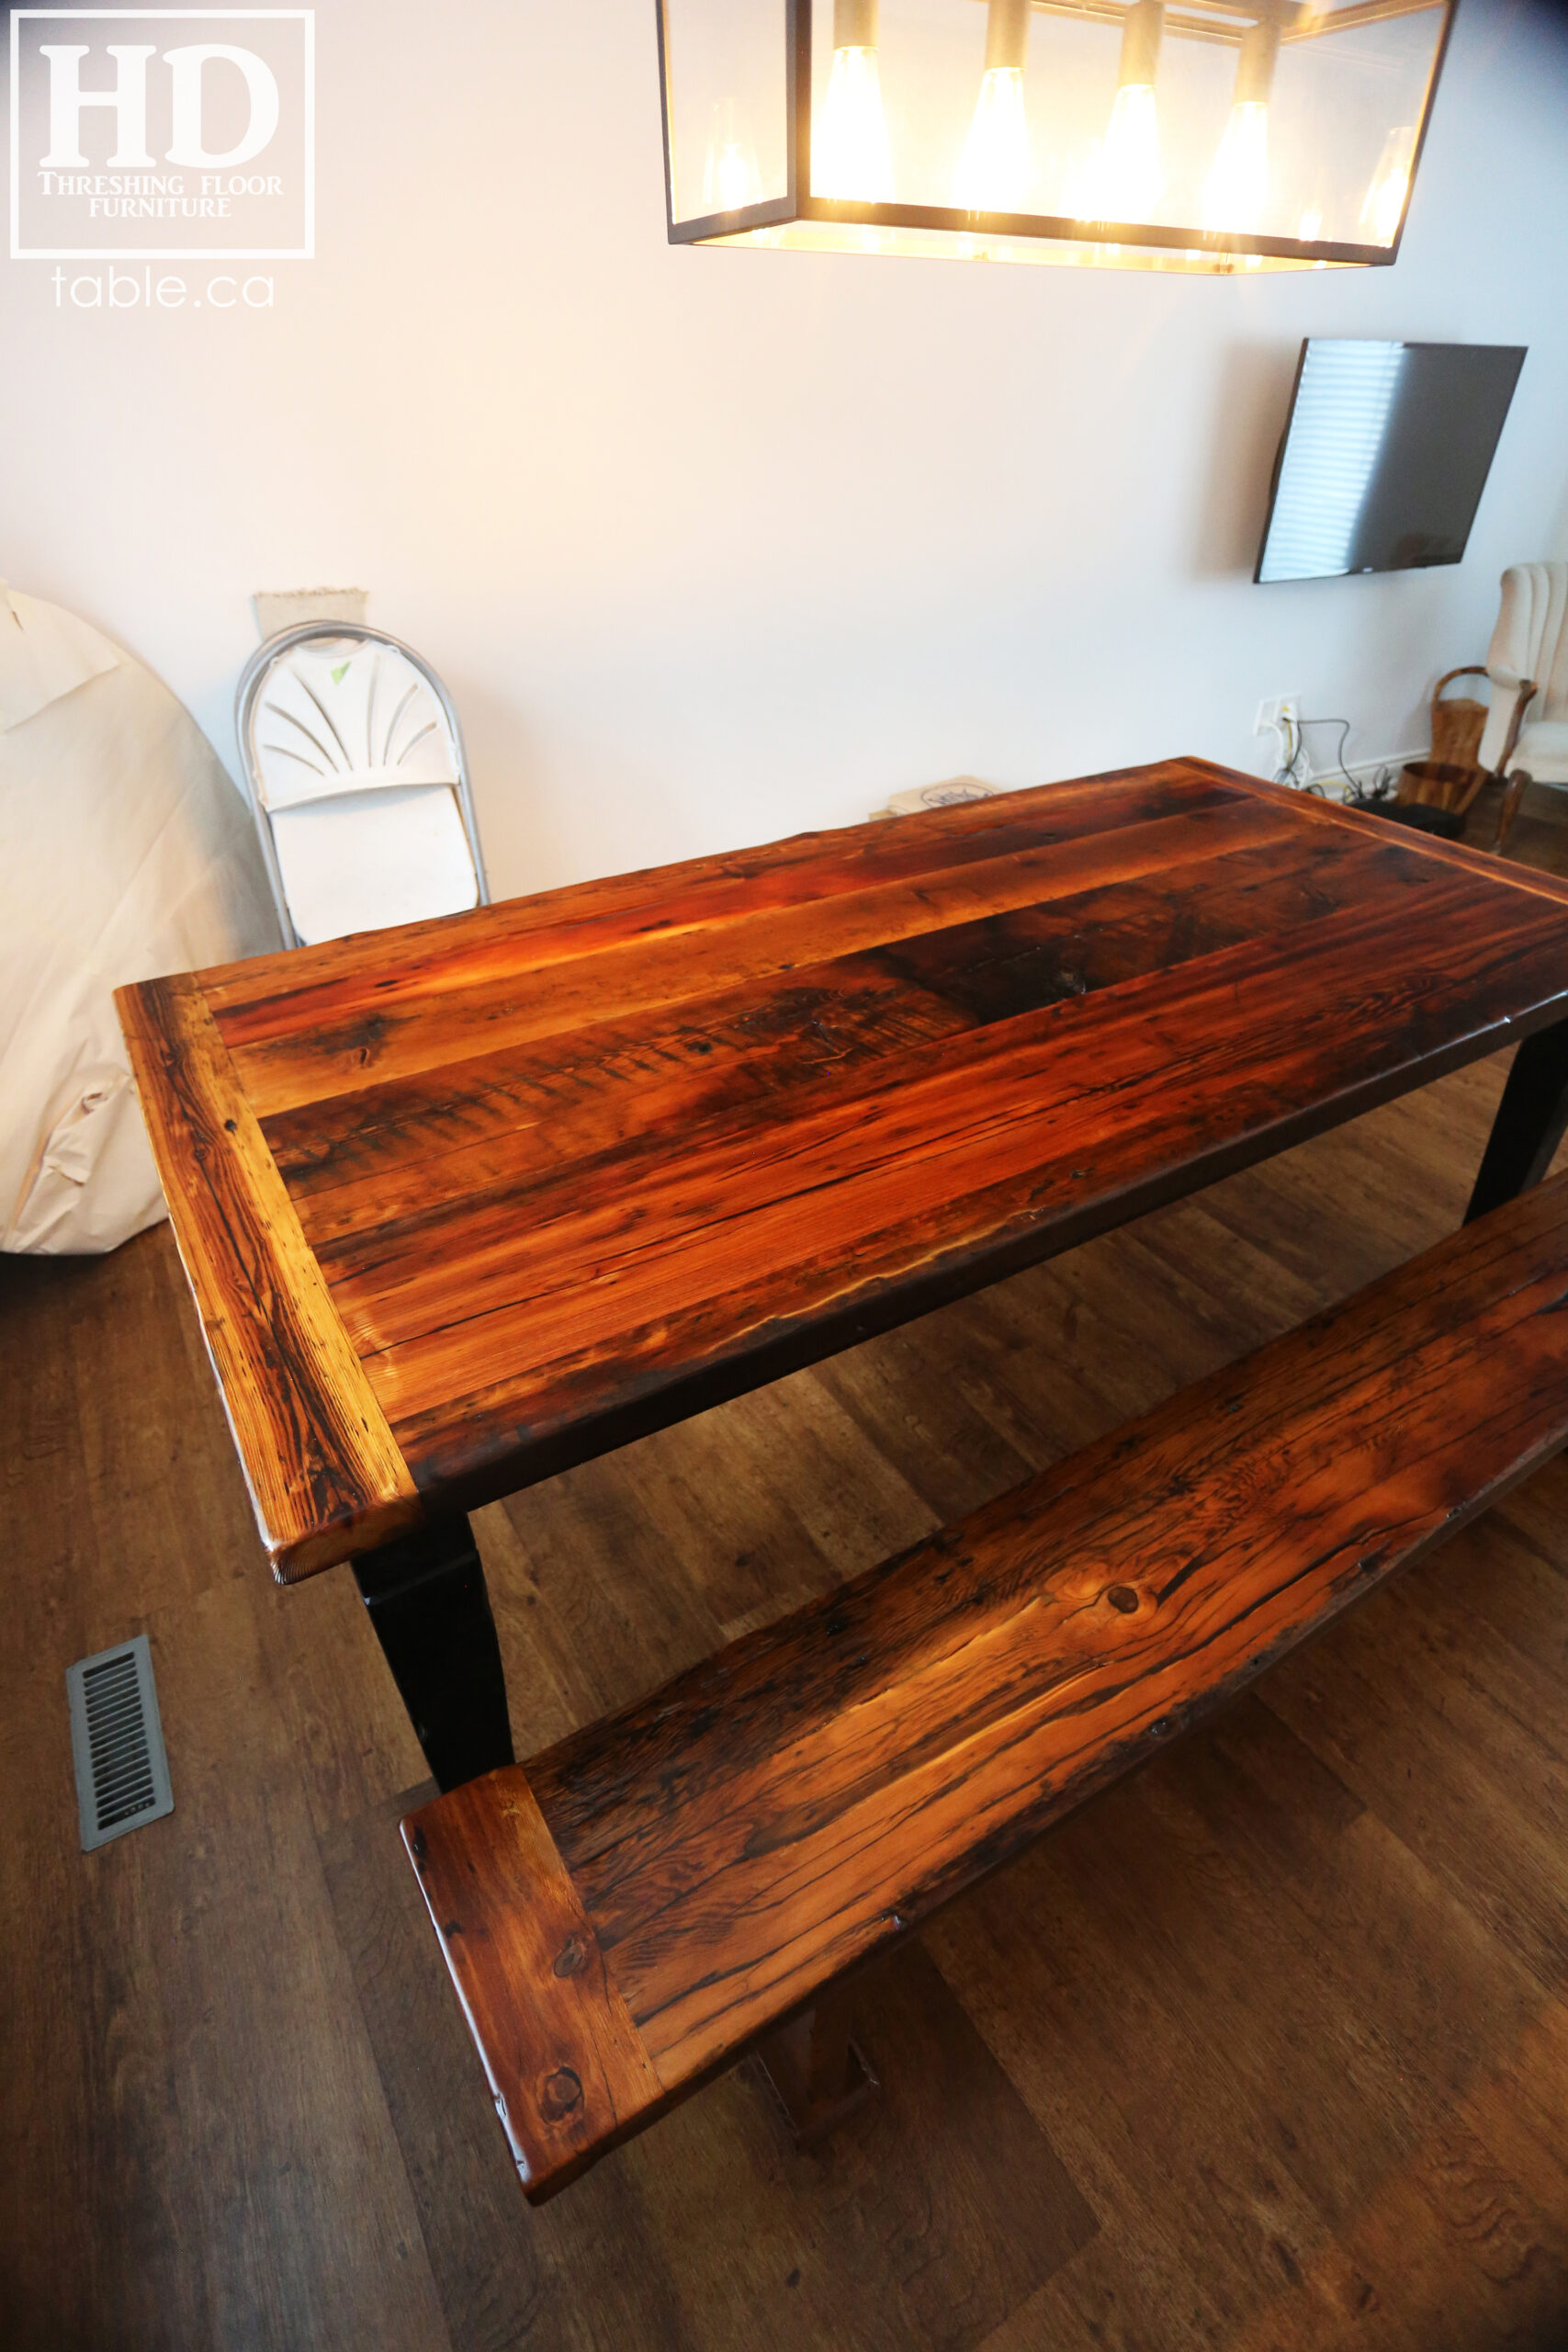 Rustic Harvest Table & Bench made from Ontario Barnwood with Epoxy + Polyurethane Finish / www.table.ca